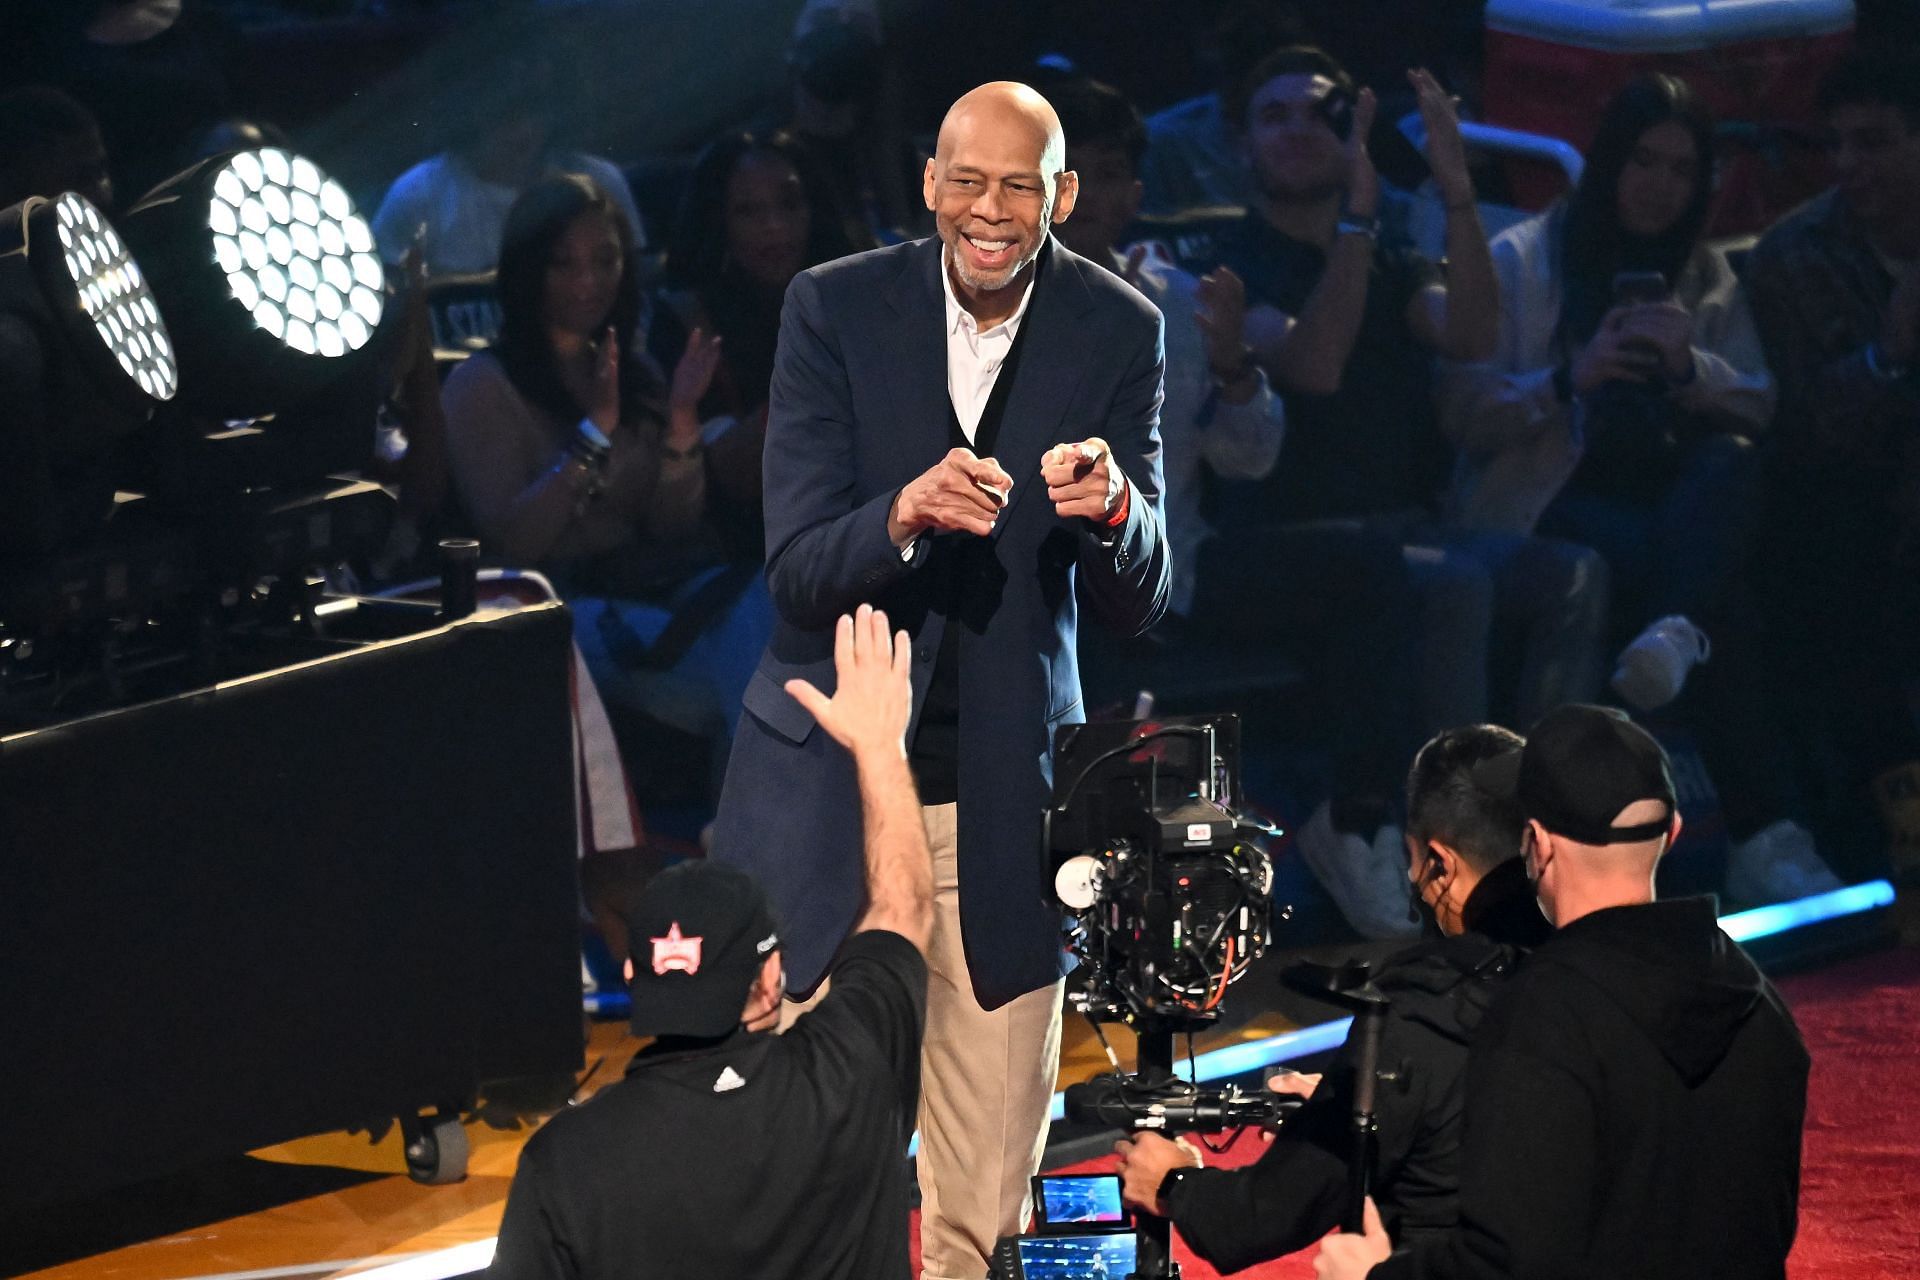 Kareem Abdul-Jabbar at the NBA 75th Anniversary Team ceremony during the 2022 NBA All-Star Game